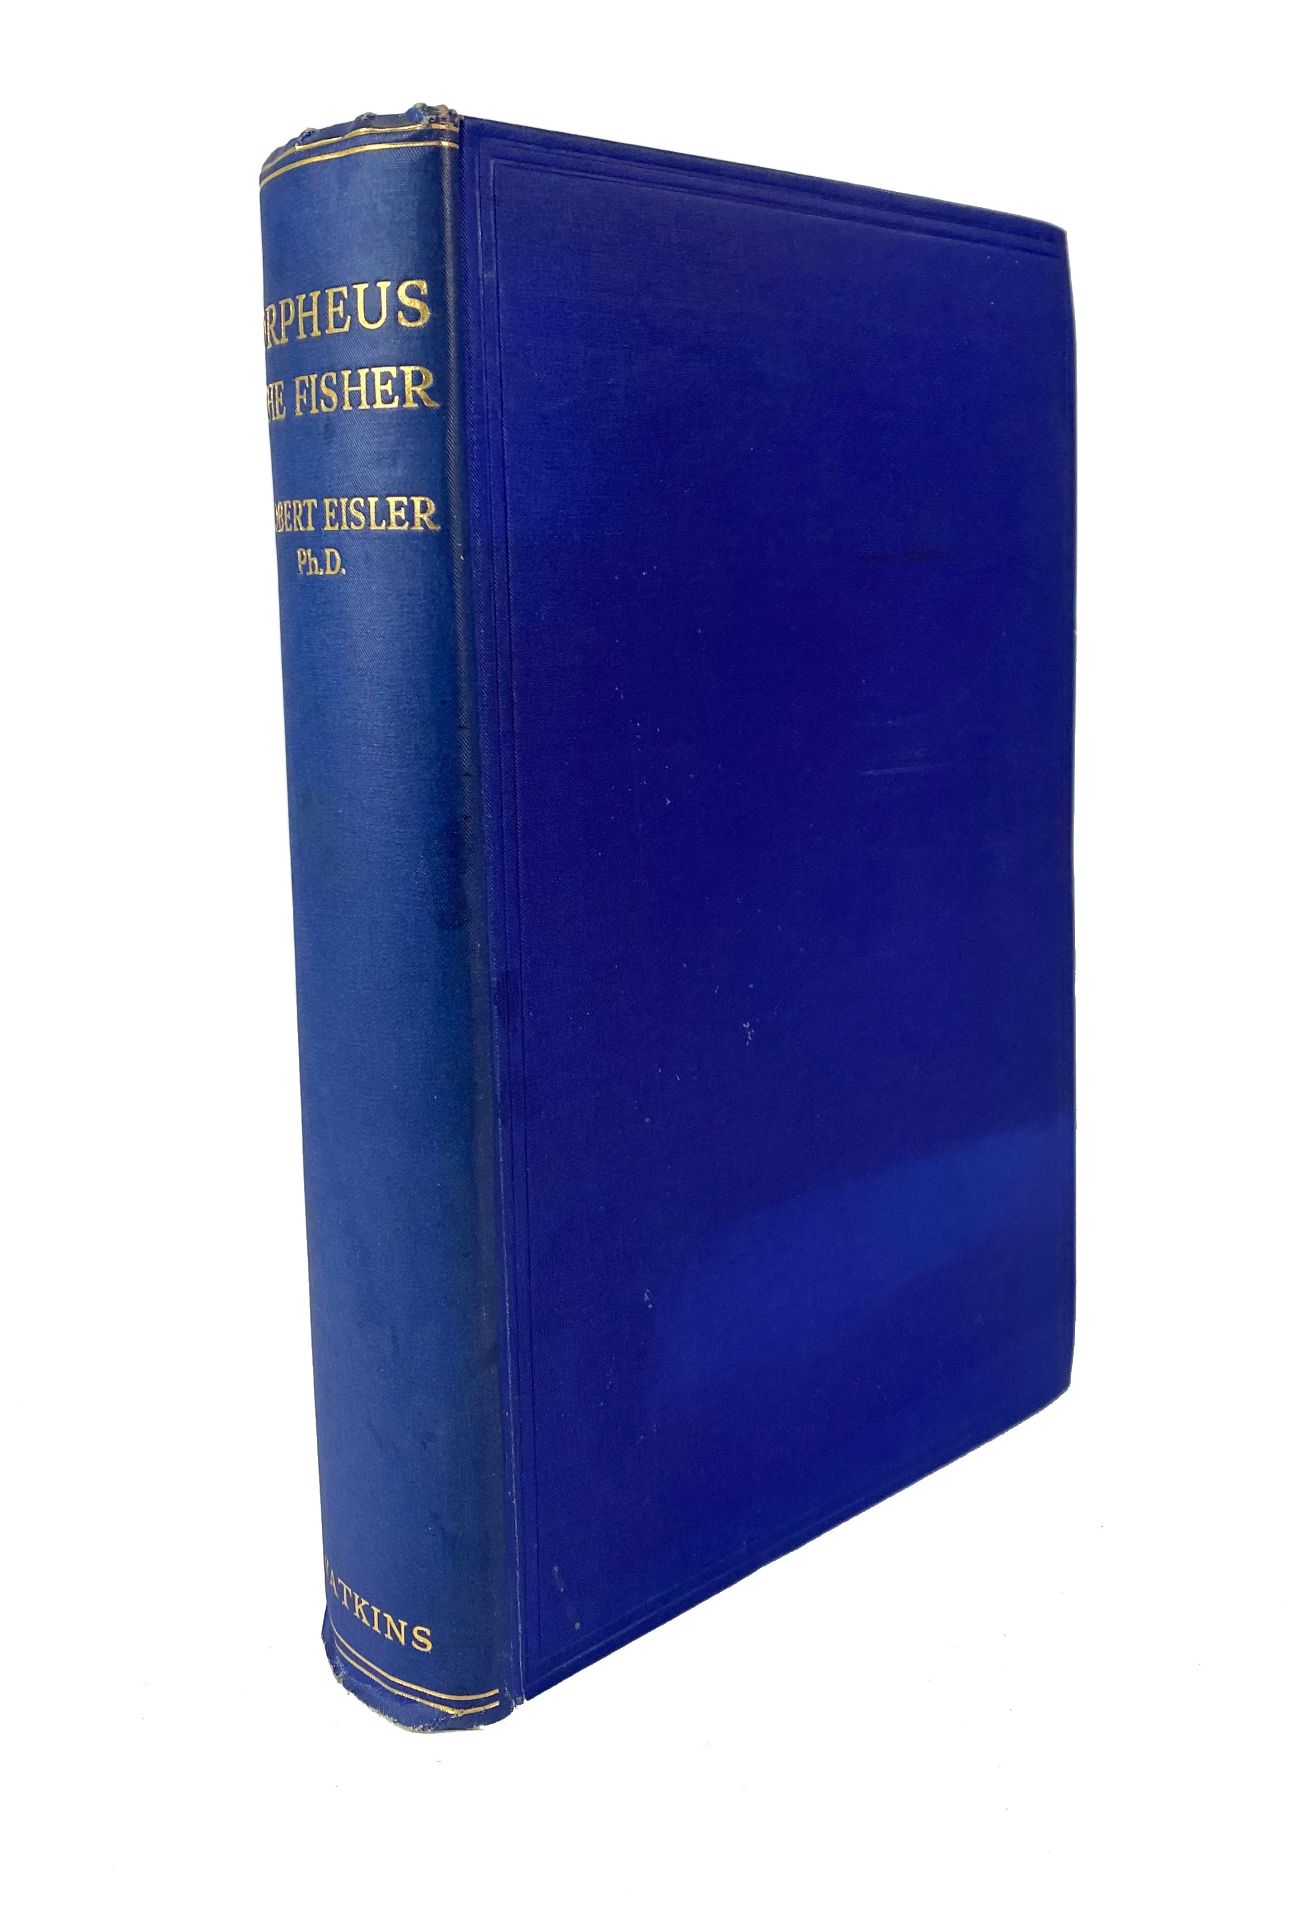 EISLER, R. Orpheus — The fisher. Comparative studies in orphic and early Christian